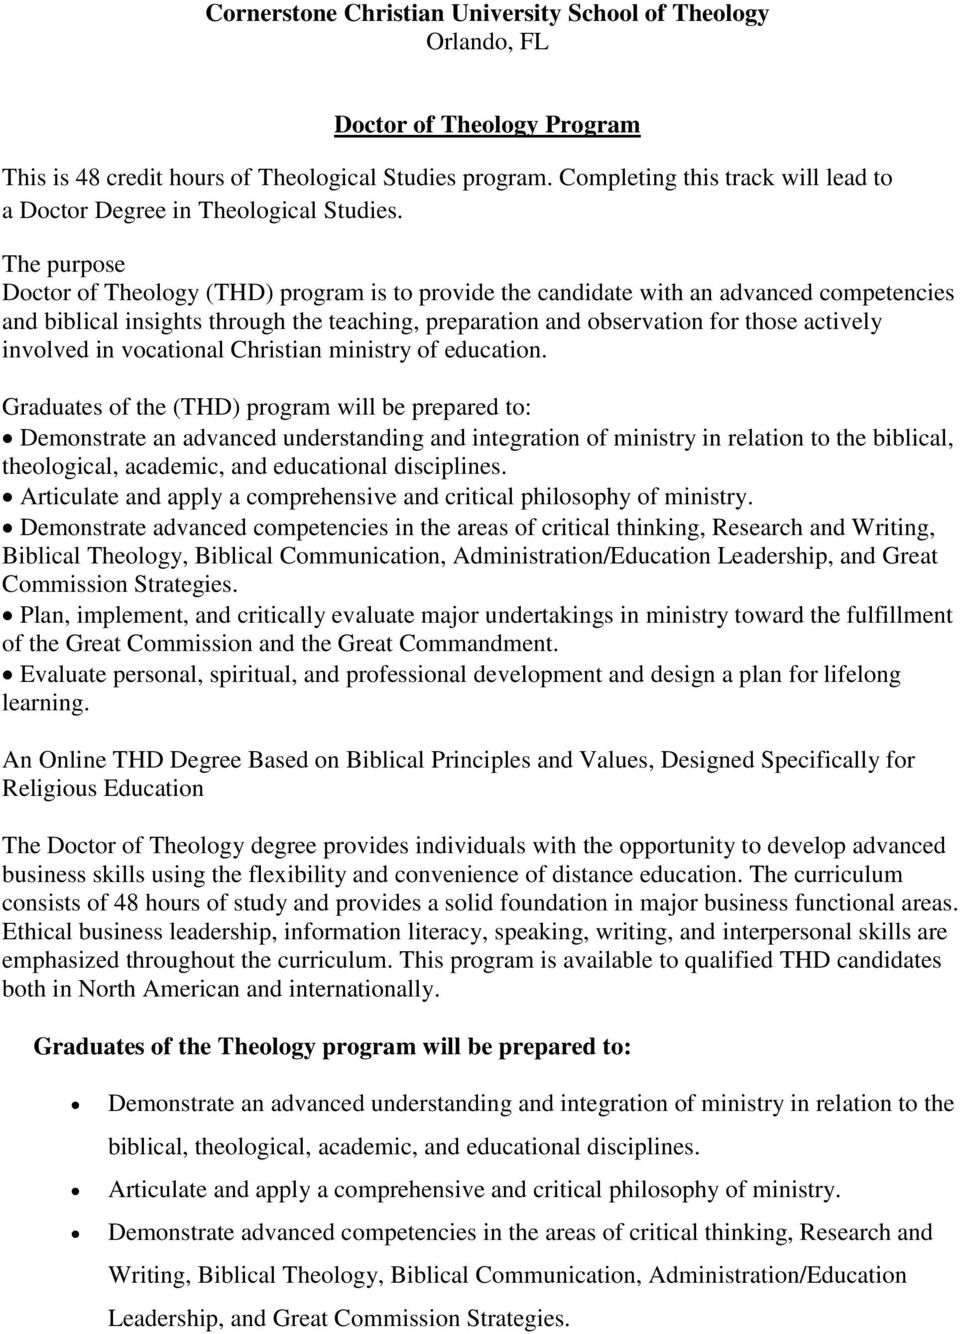 The purpose Doctor of Theology (THD) program is to provide the candidate with an advanced competencies and biblical insights through the teaching, preparation and observation for those actively